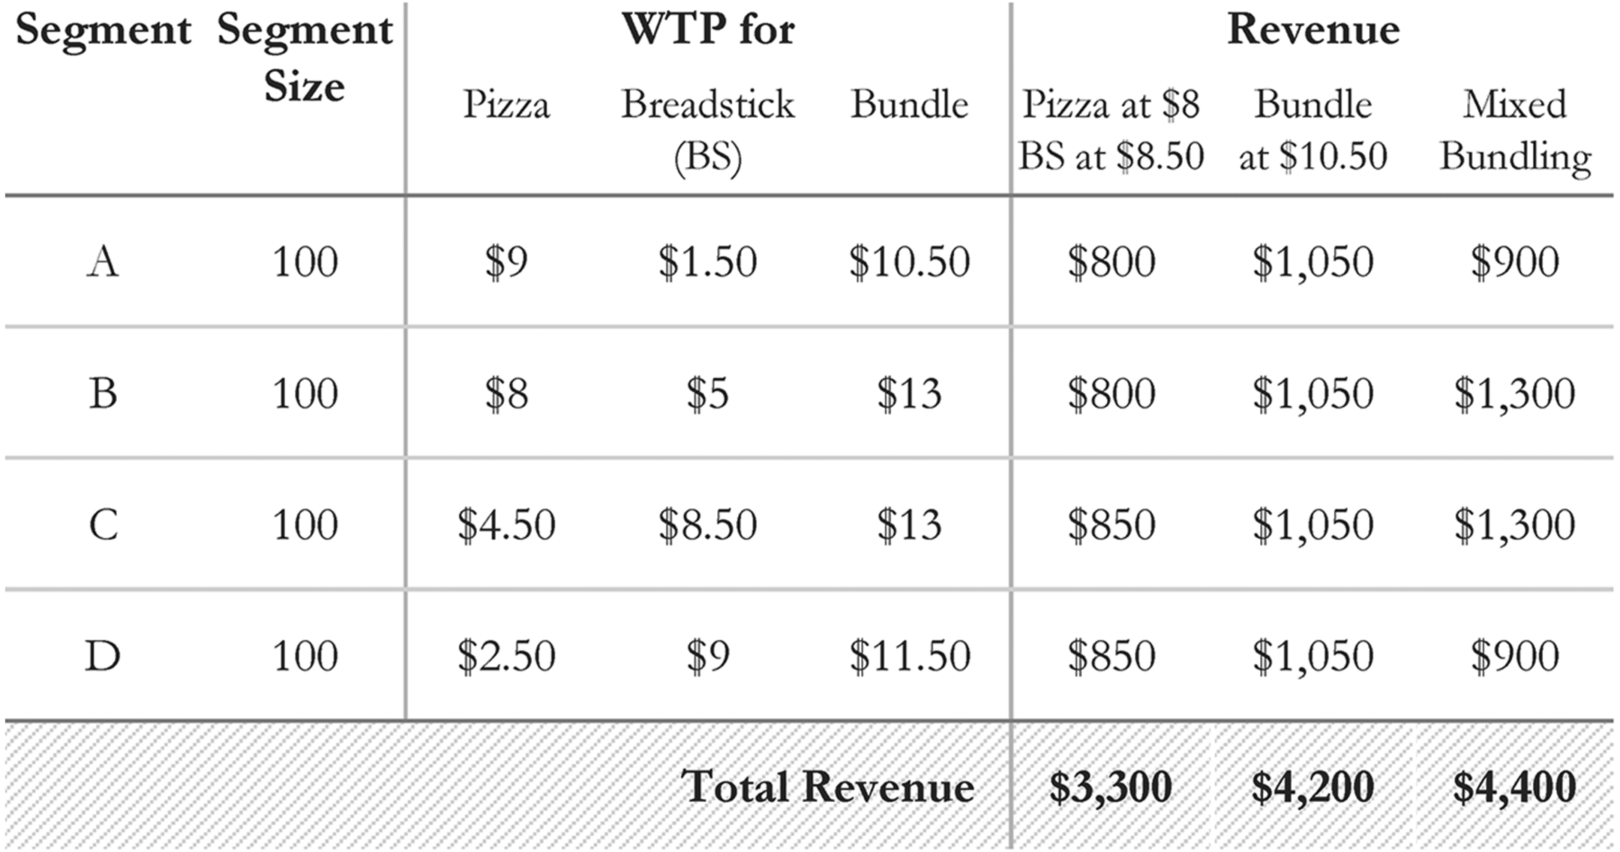 The table depicting the bundling of pizza and breadsticks.